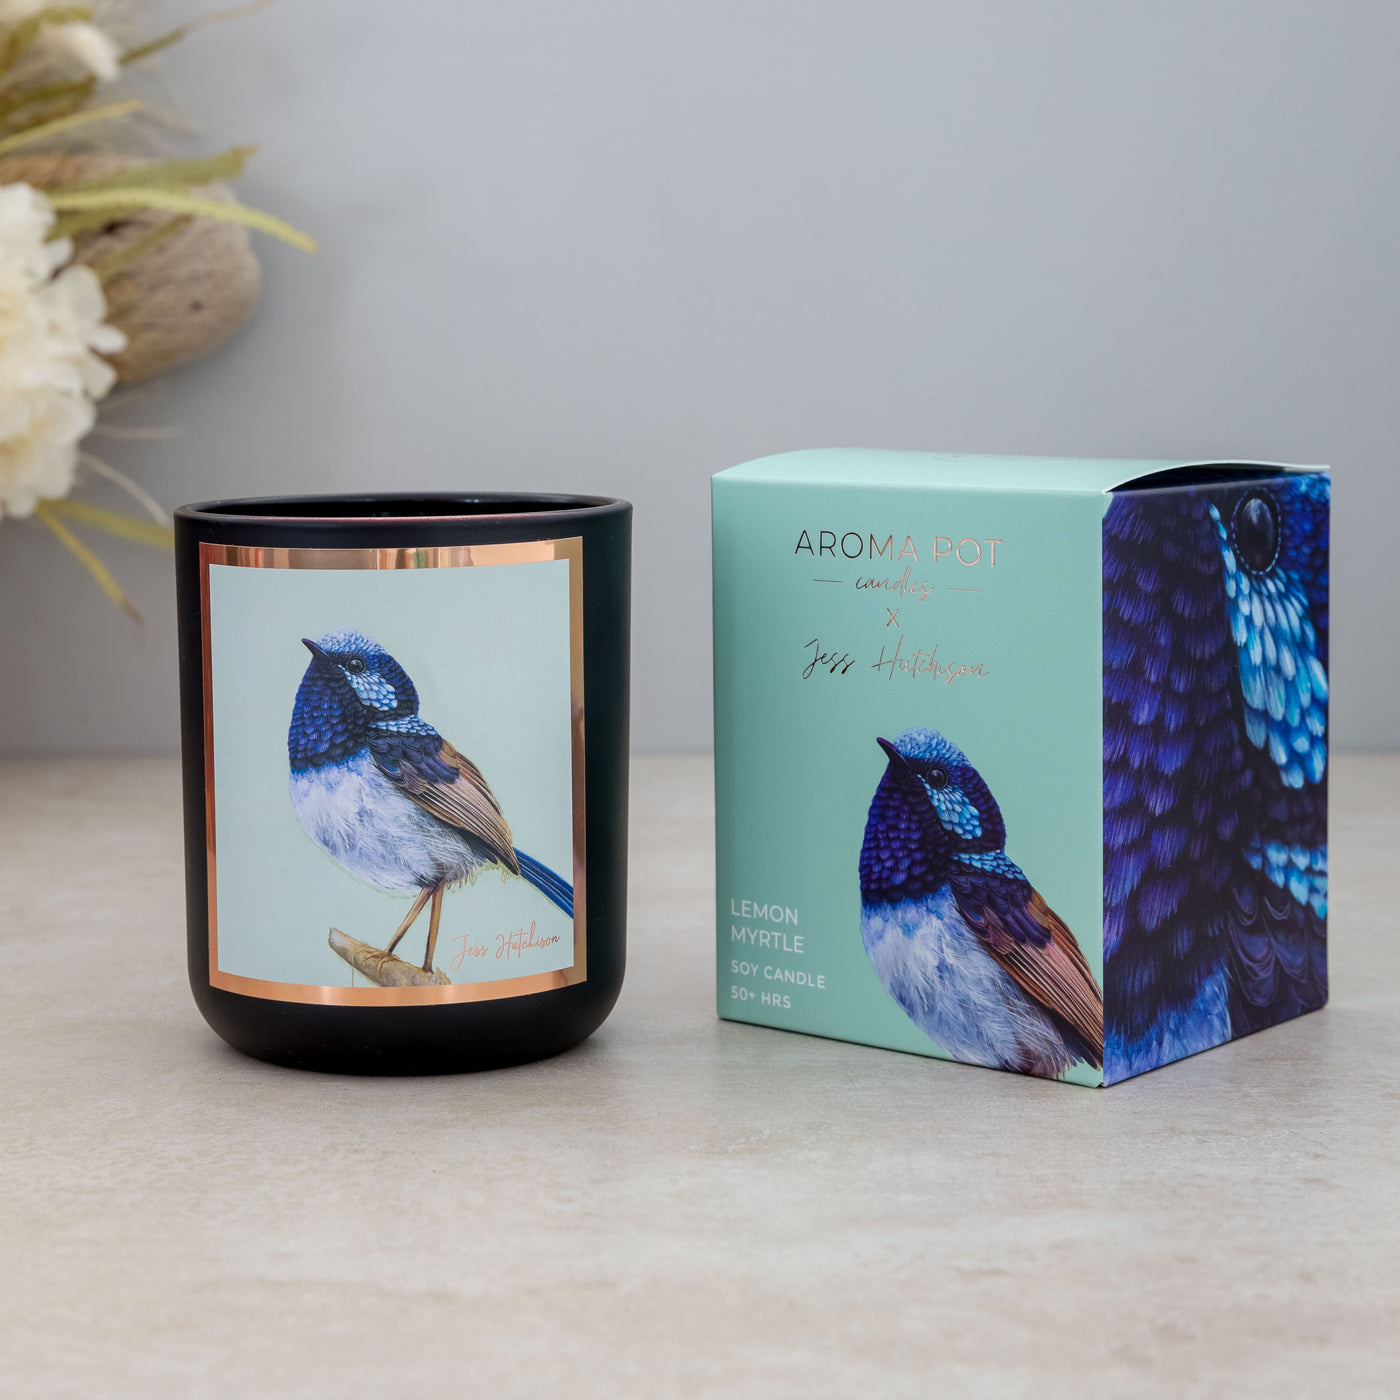 Australian artist FAIRY WREN cup and candle gift pack - choose your own candle